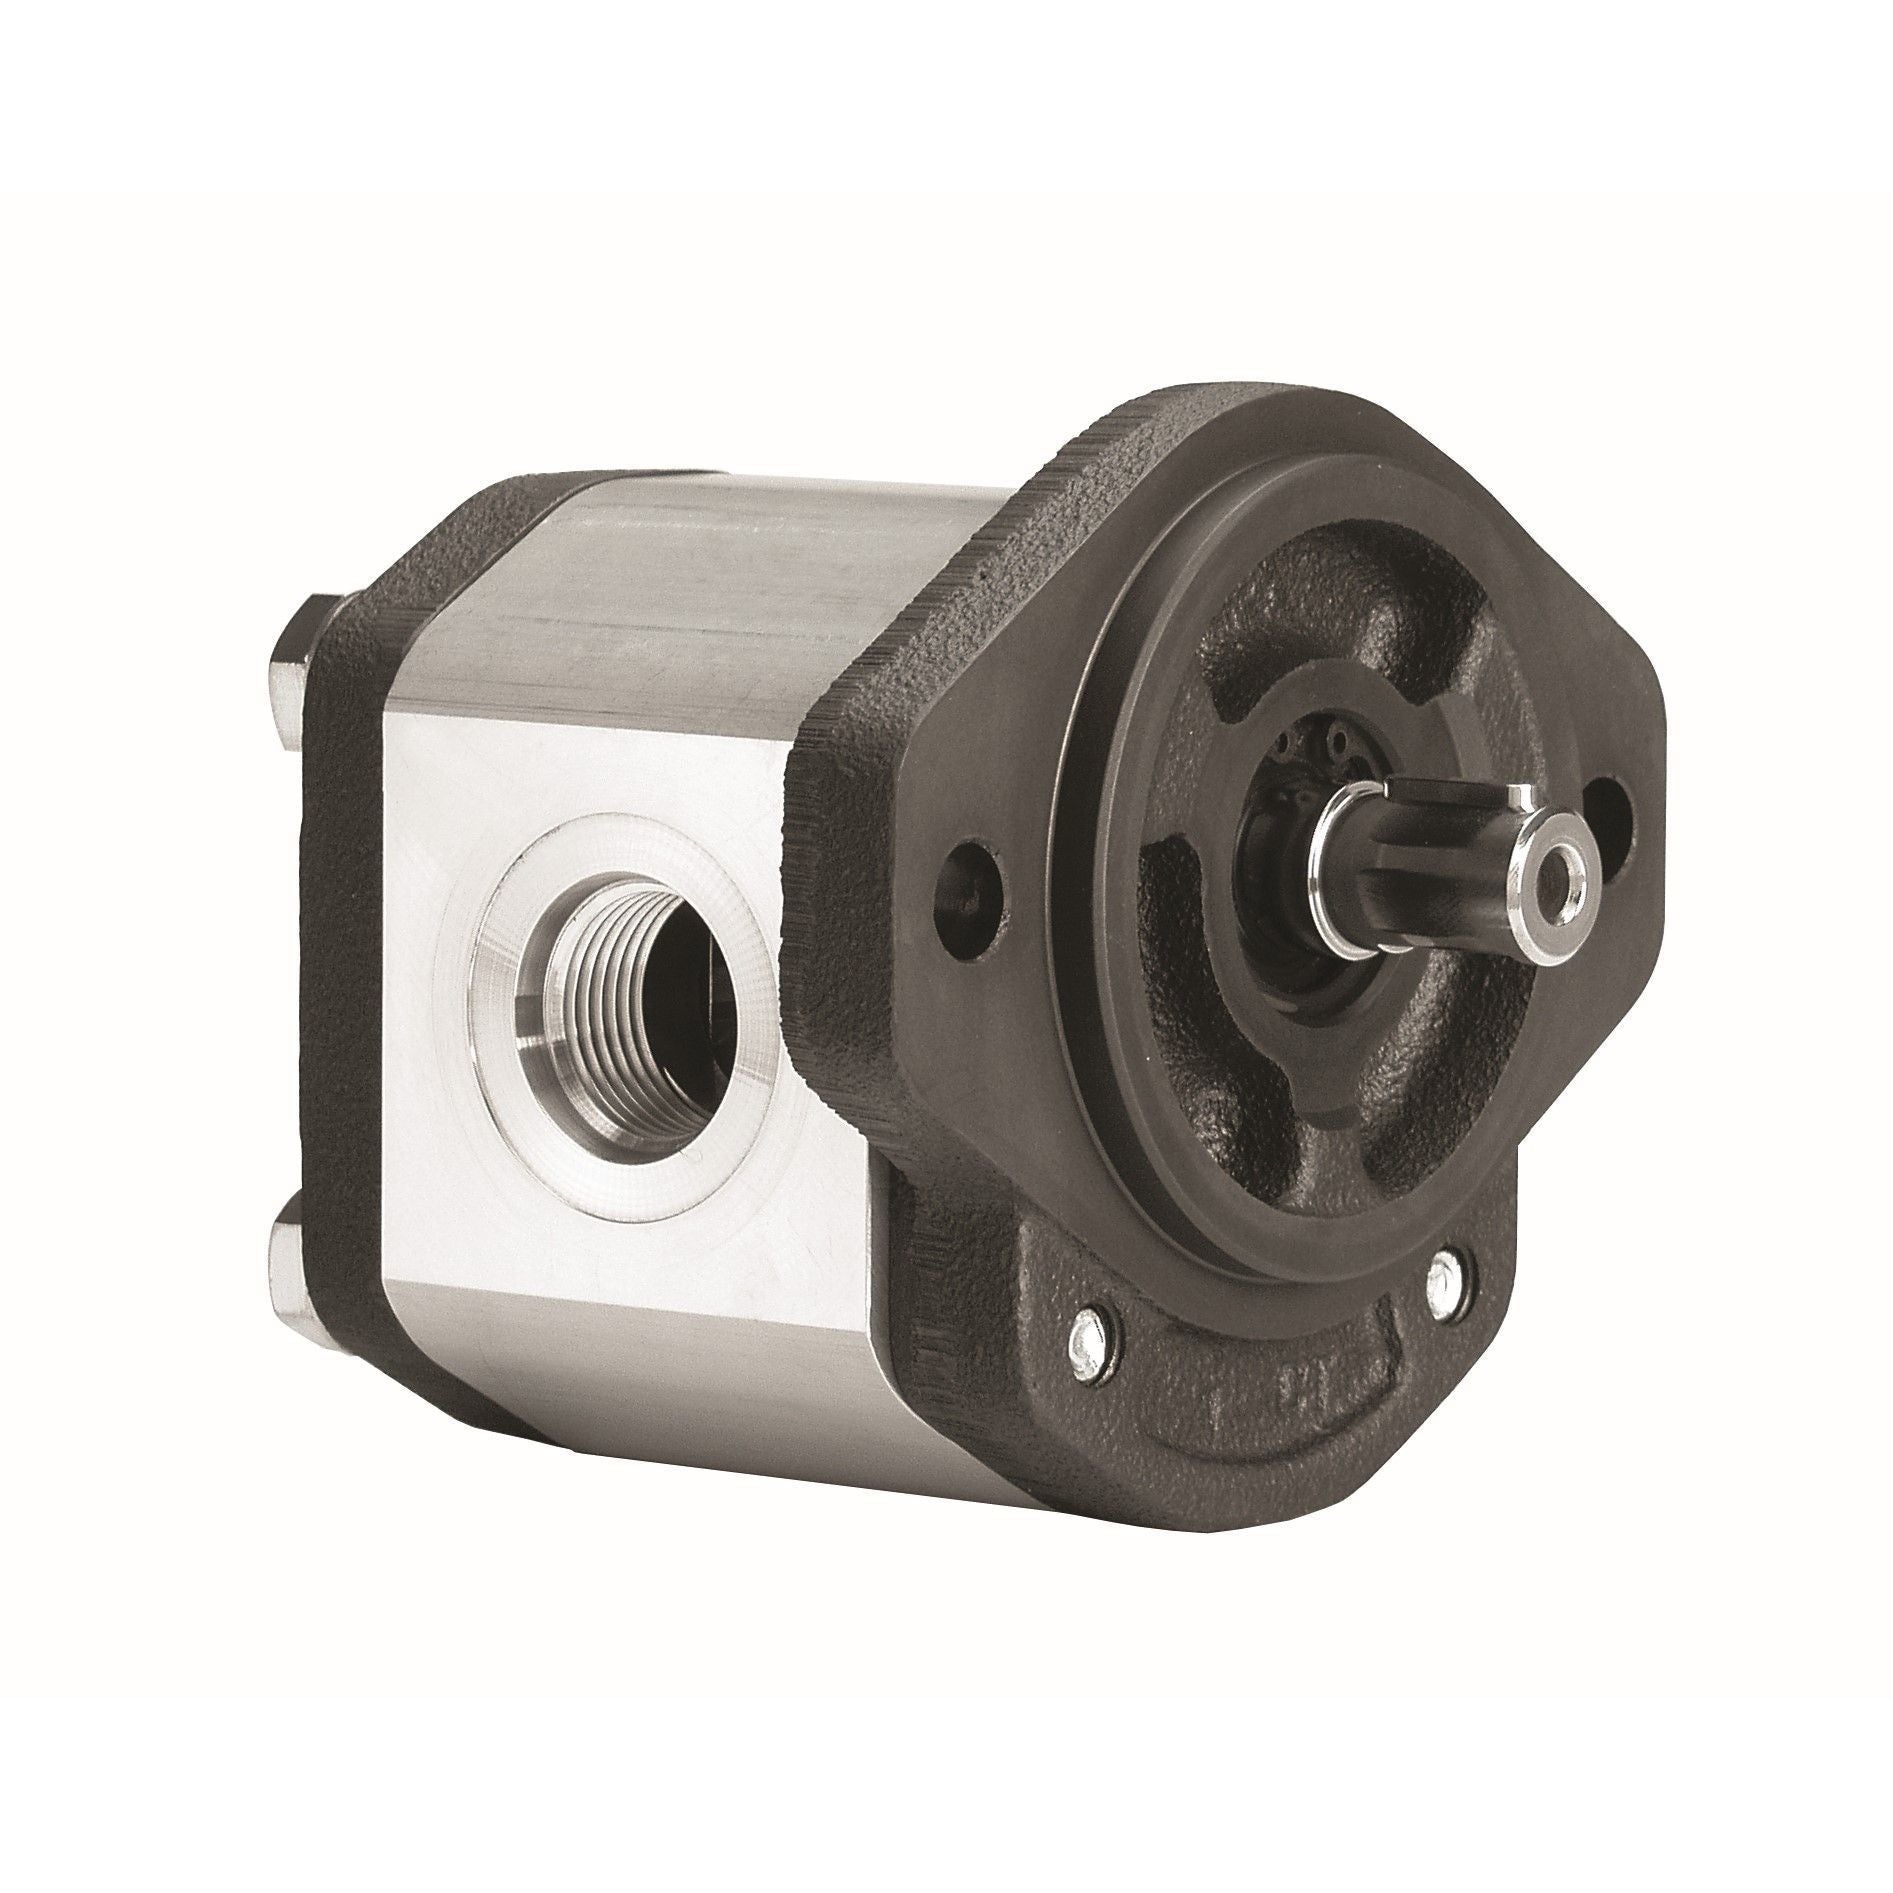 GHP2A-D-22 : Marzocchi Gear Pump, CW, 16cc (0.976in3), 7.61 GPM, 3770psi, 2800 RPM, #12 SAE (3/4") In, #10 SAE (5/8") Out, Keyed Shaft 5/8" Bore x 5/32" Key, SAE A 2-Bolt Mount